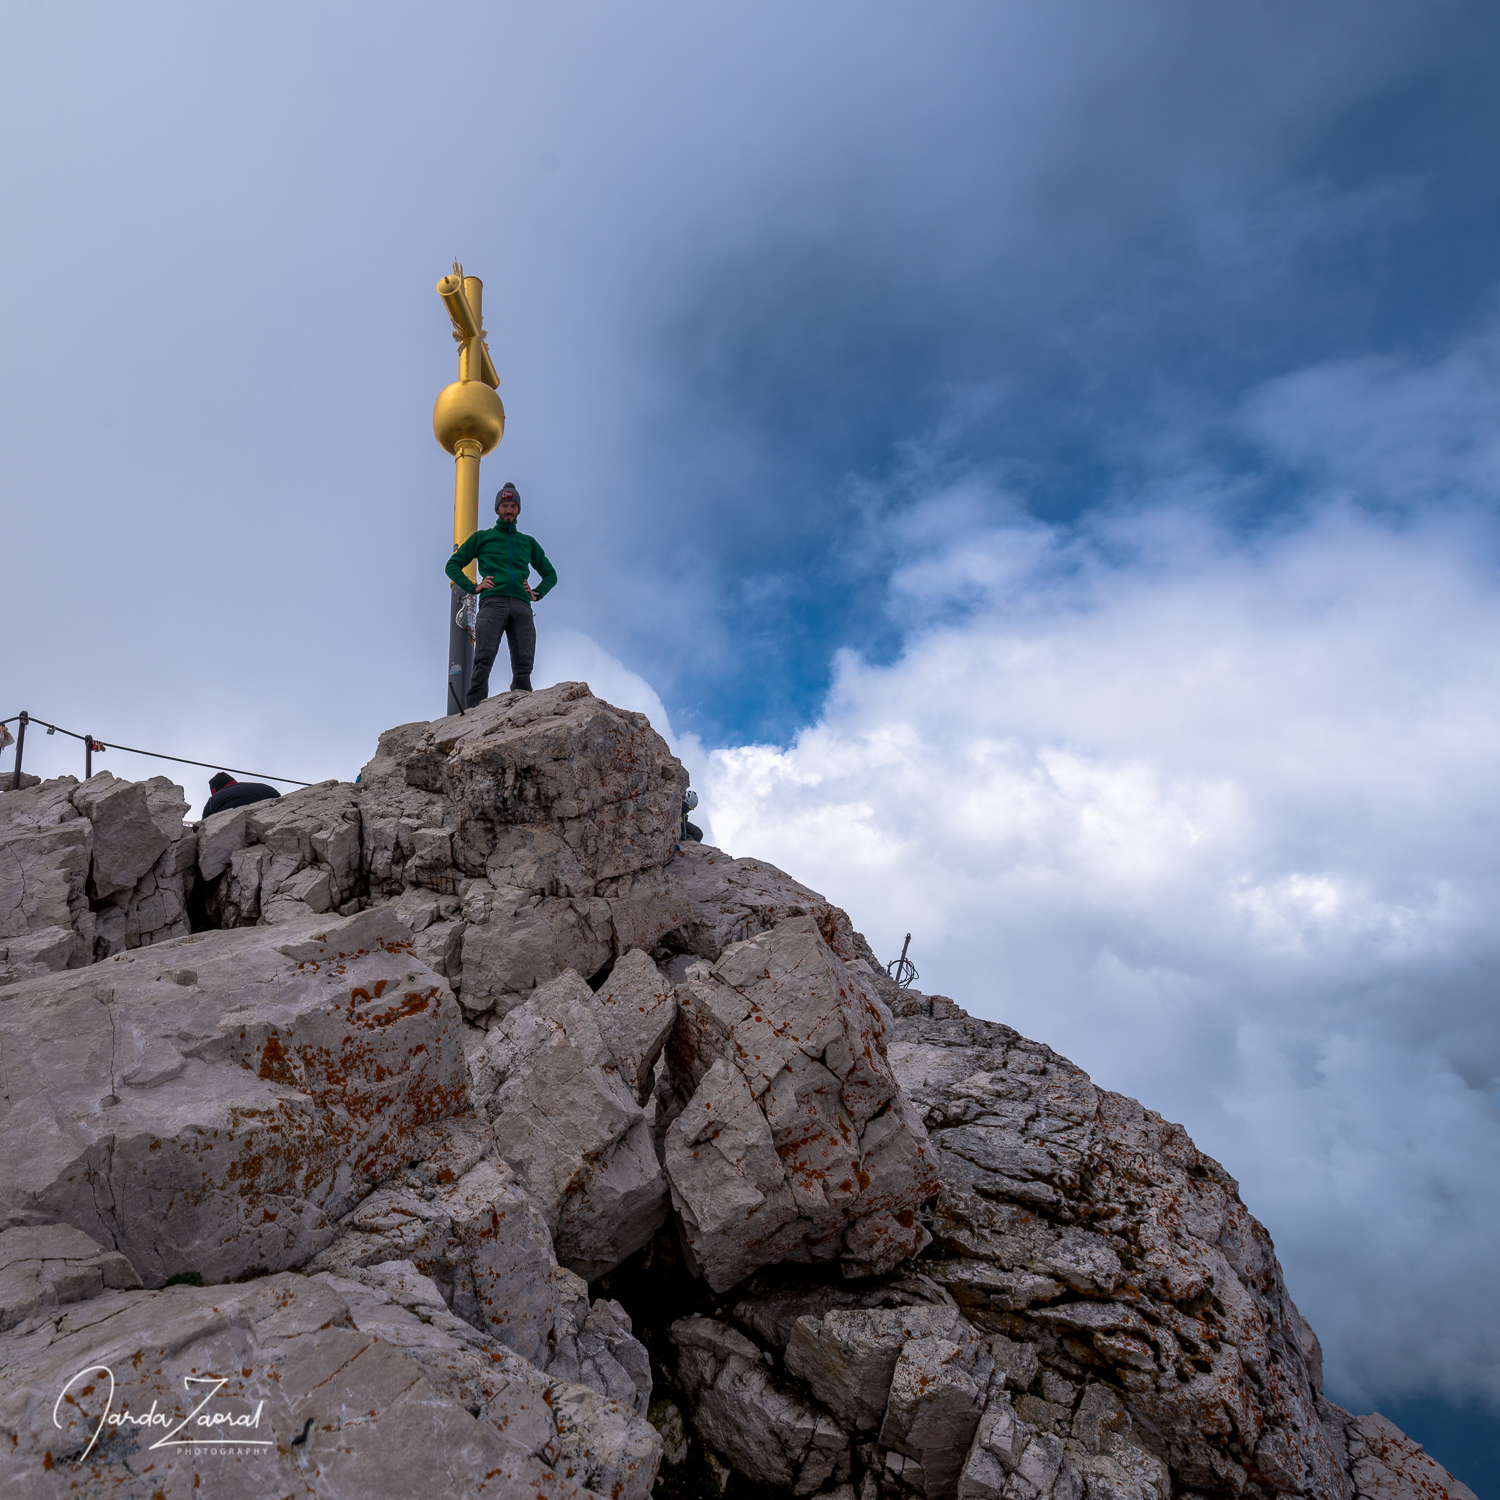 Valuable moment - noone on the top of Zugspitze